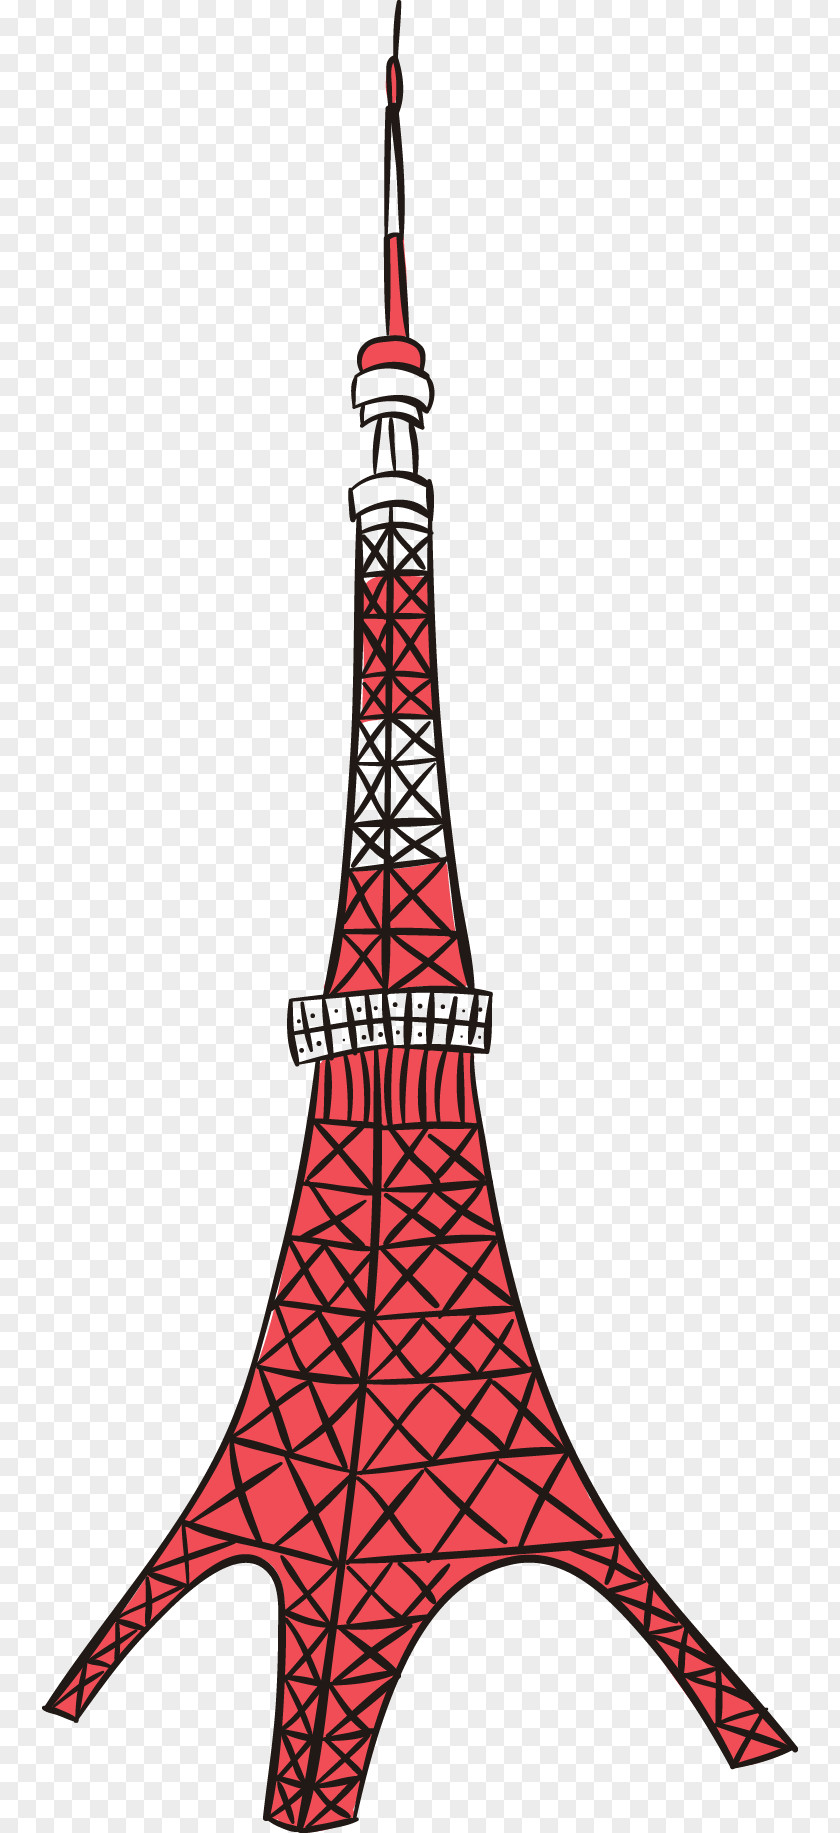 Decorative Elements Of Japanese Culture Tokyo Tower Skytree Eiffel PNG